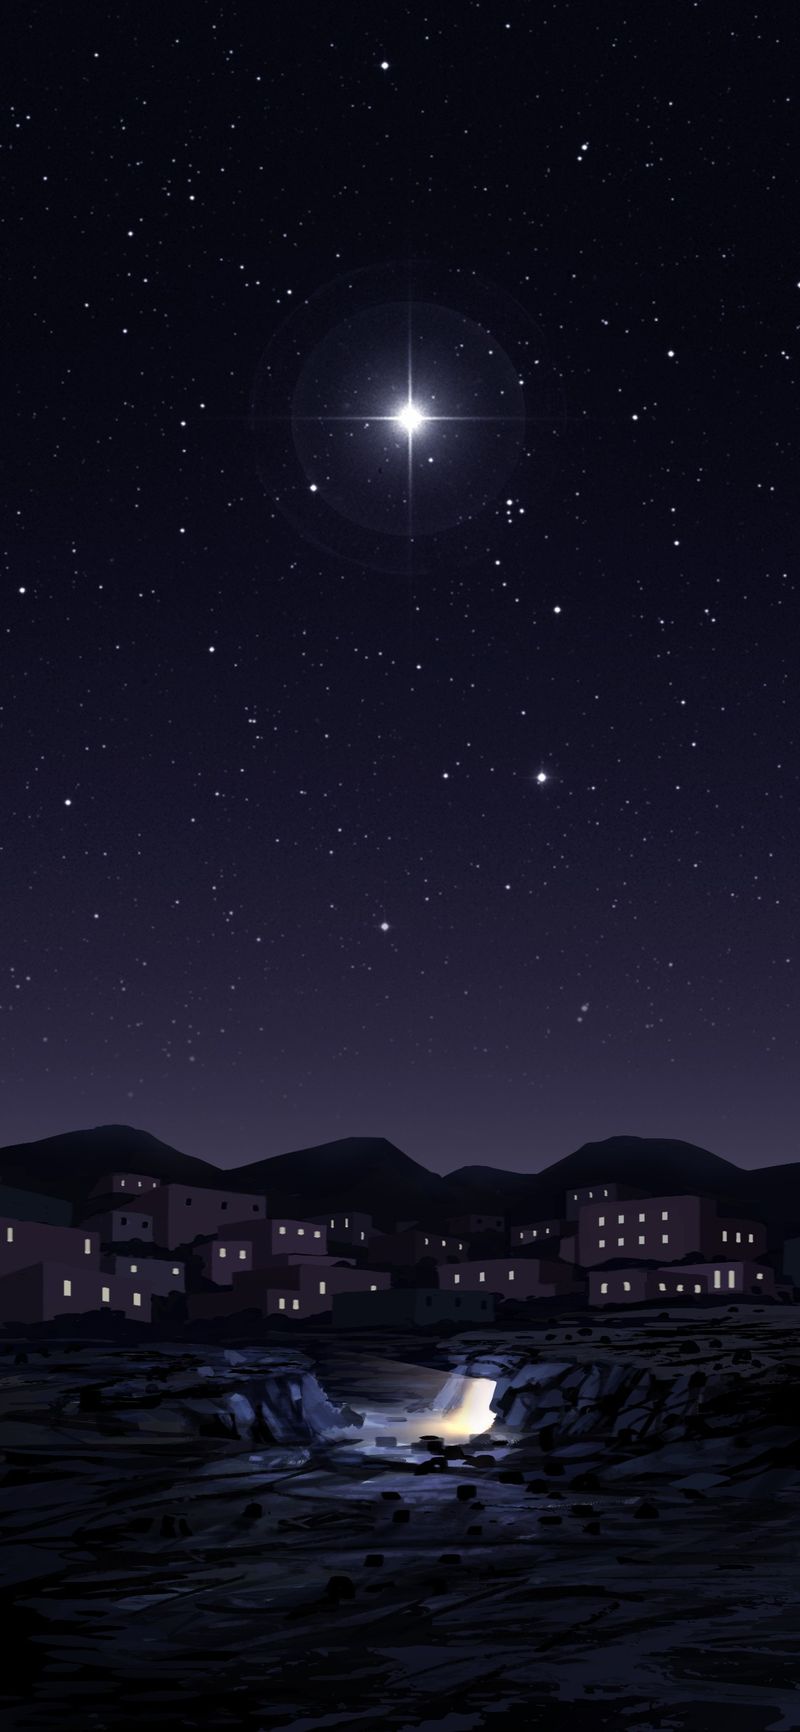 A bright star shines over a stable in Bethlehem.